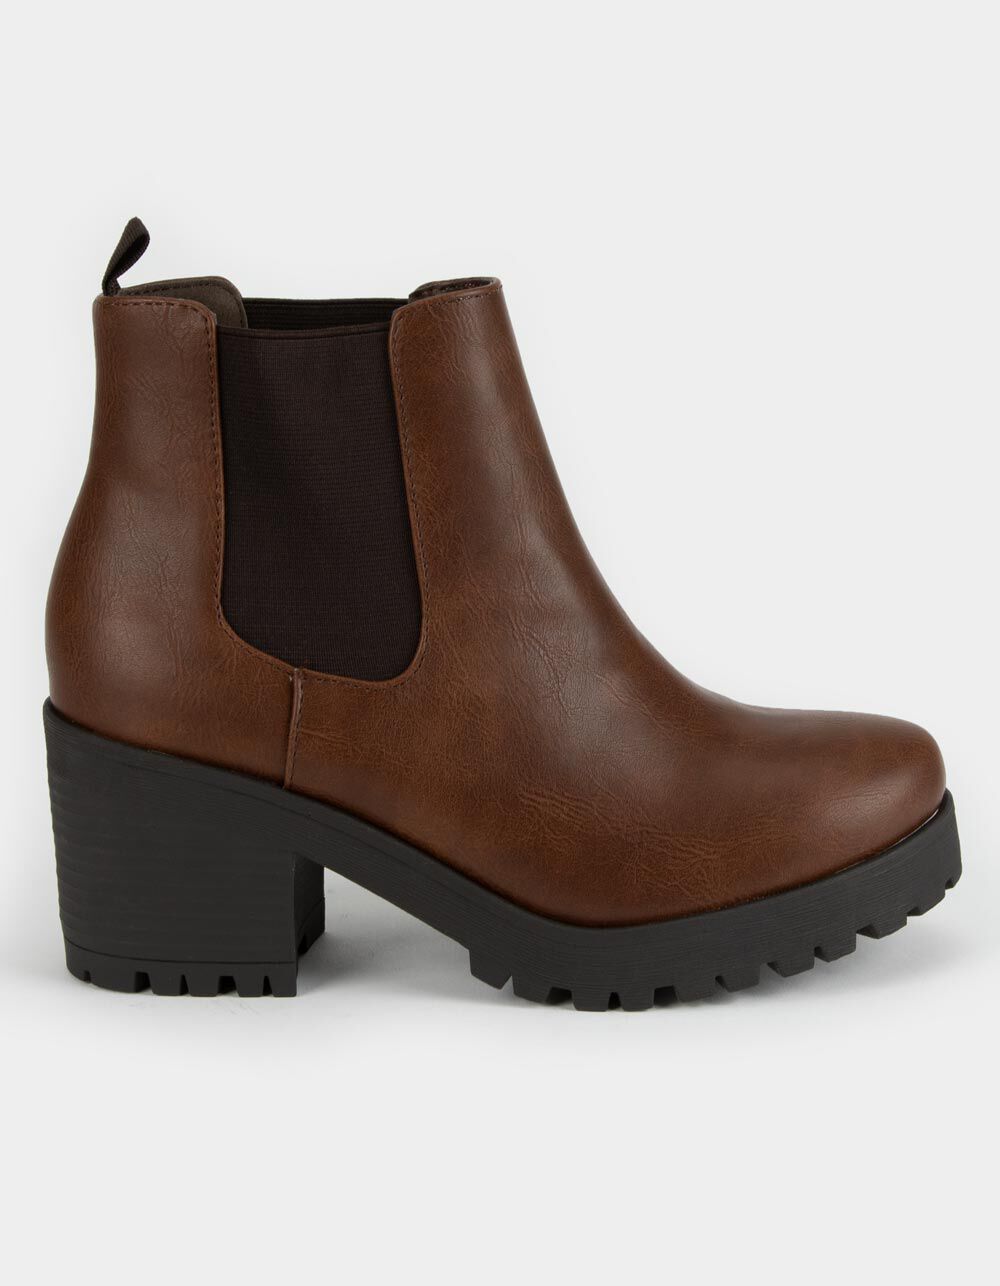 SODA Lug Sole Womens Brown Chelsea Boots - BROWN | Tillys